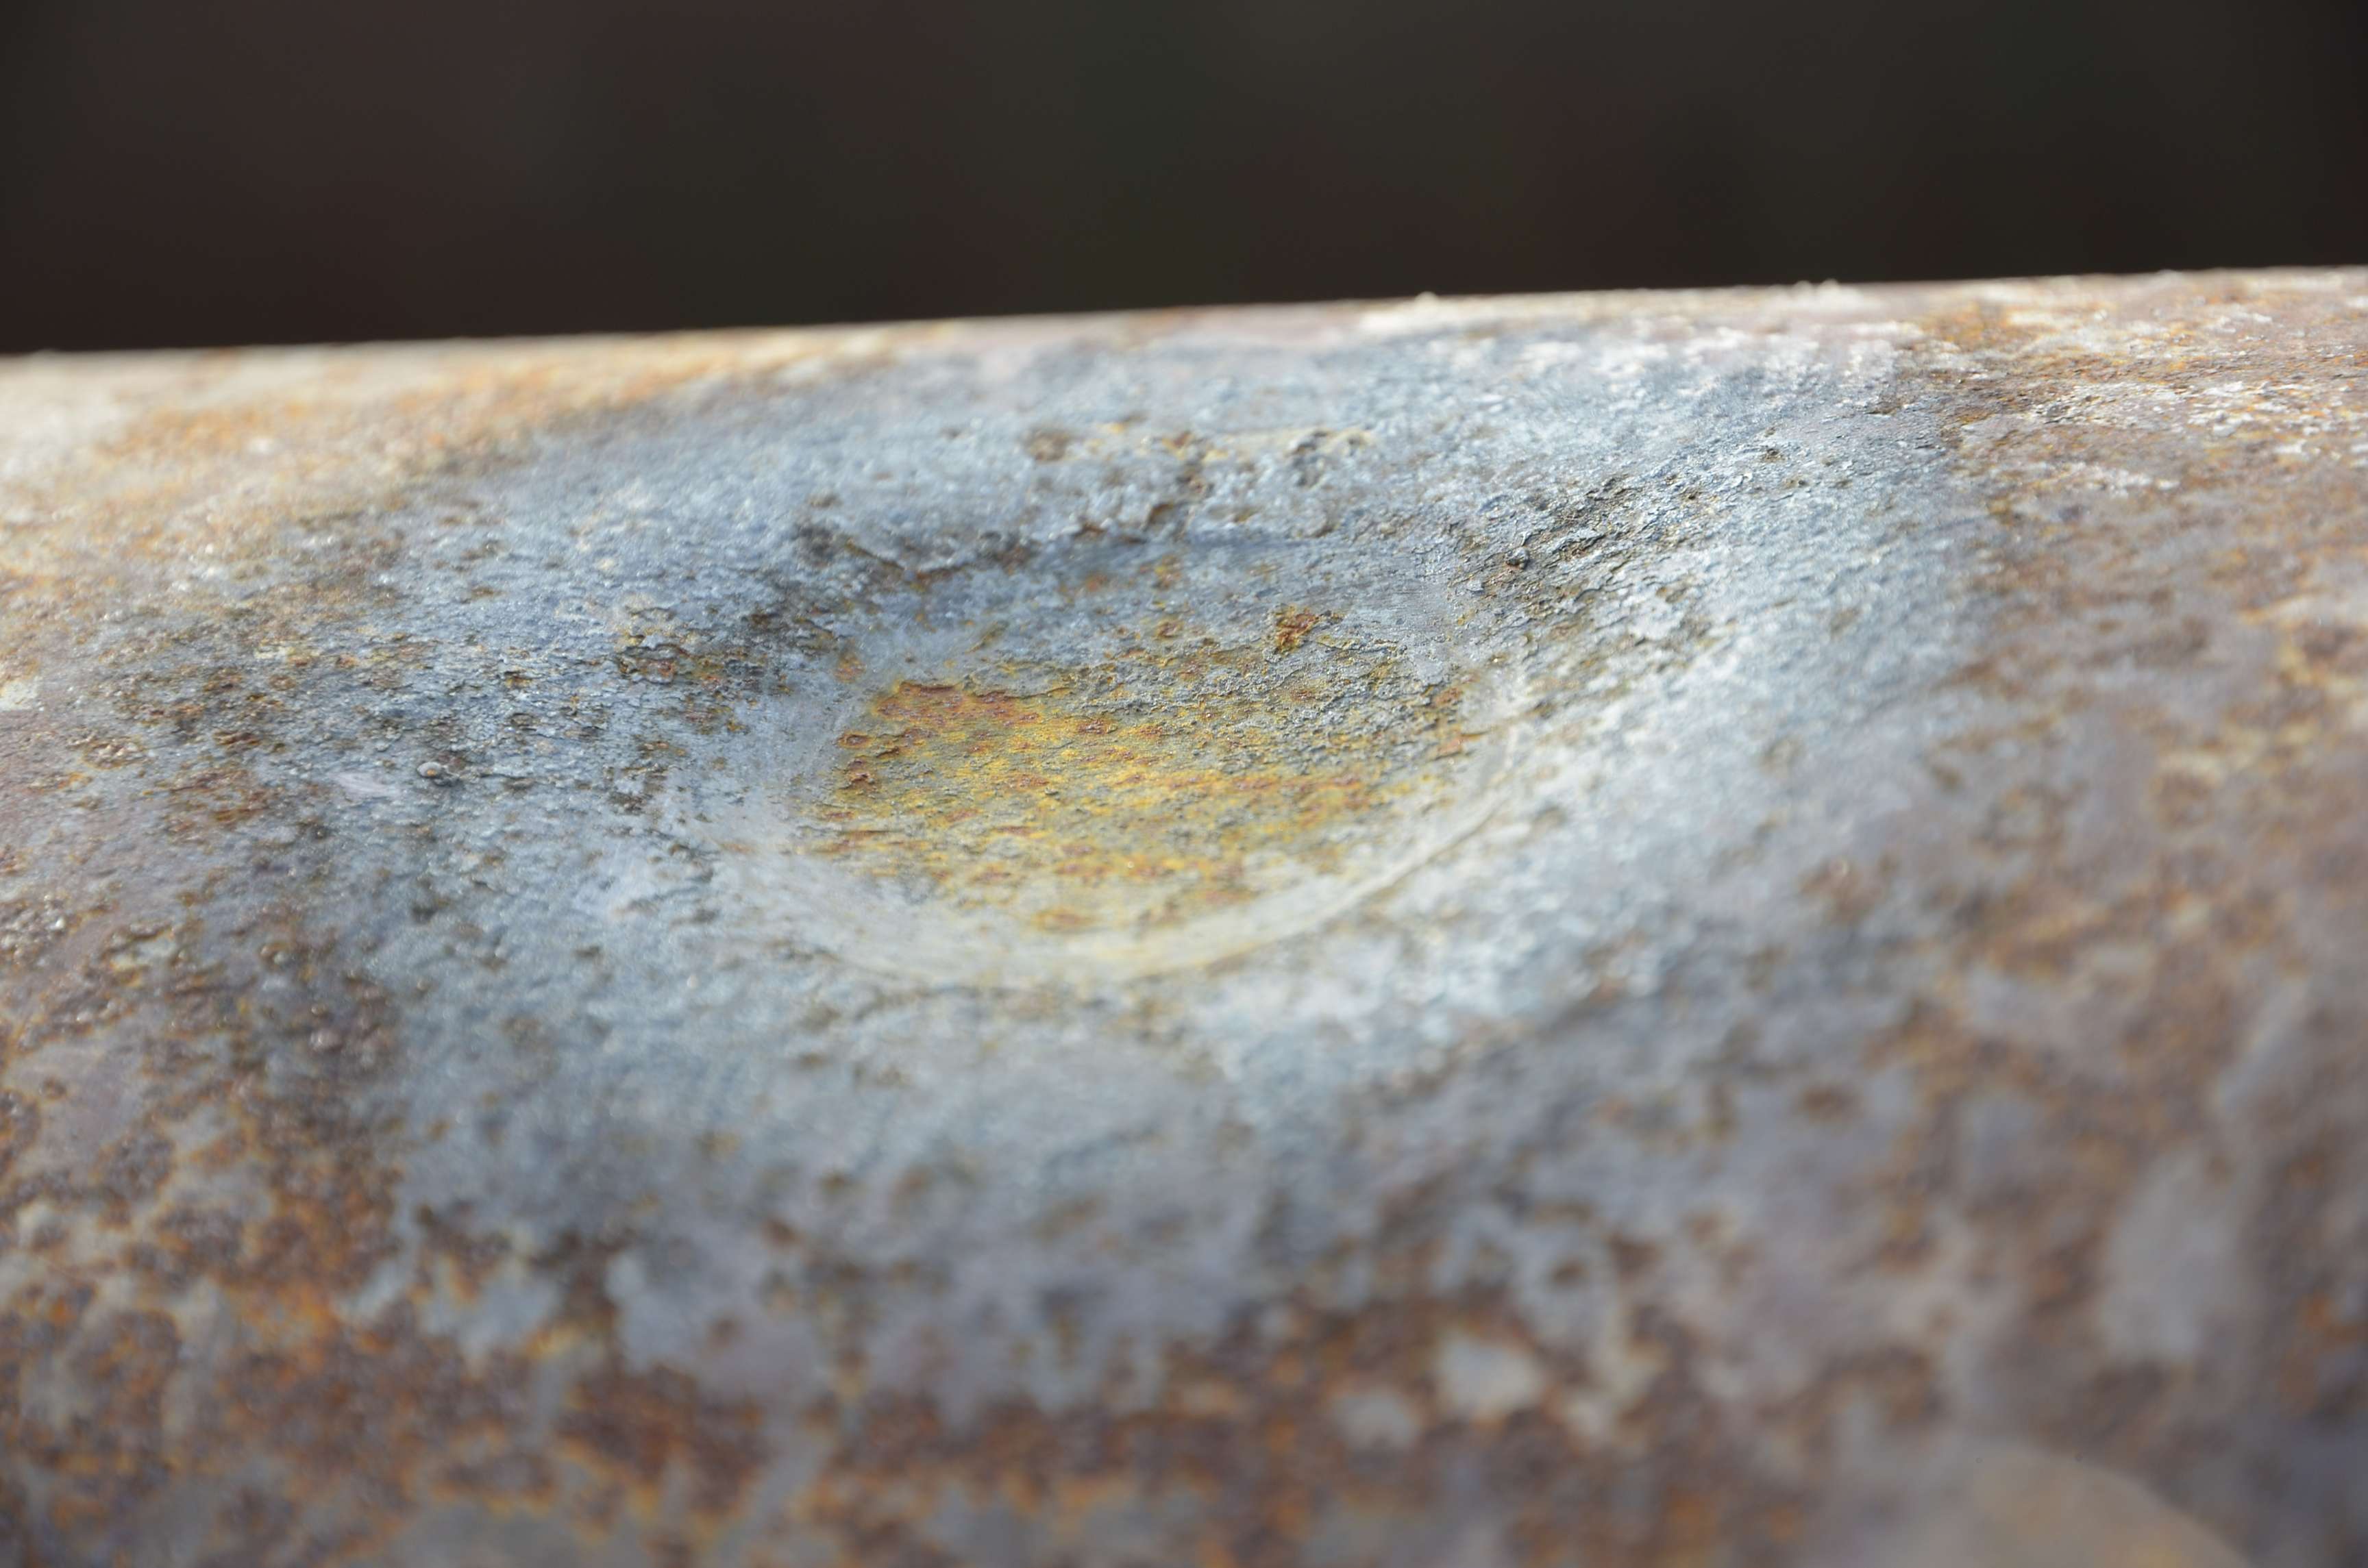 Close up of a dent in the surface of a pipeline.